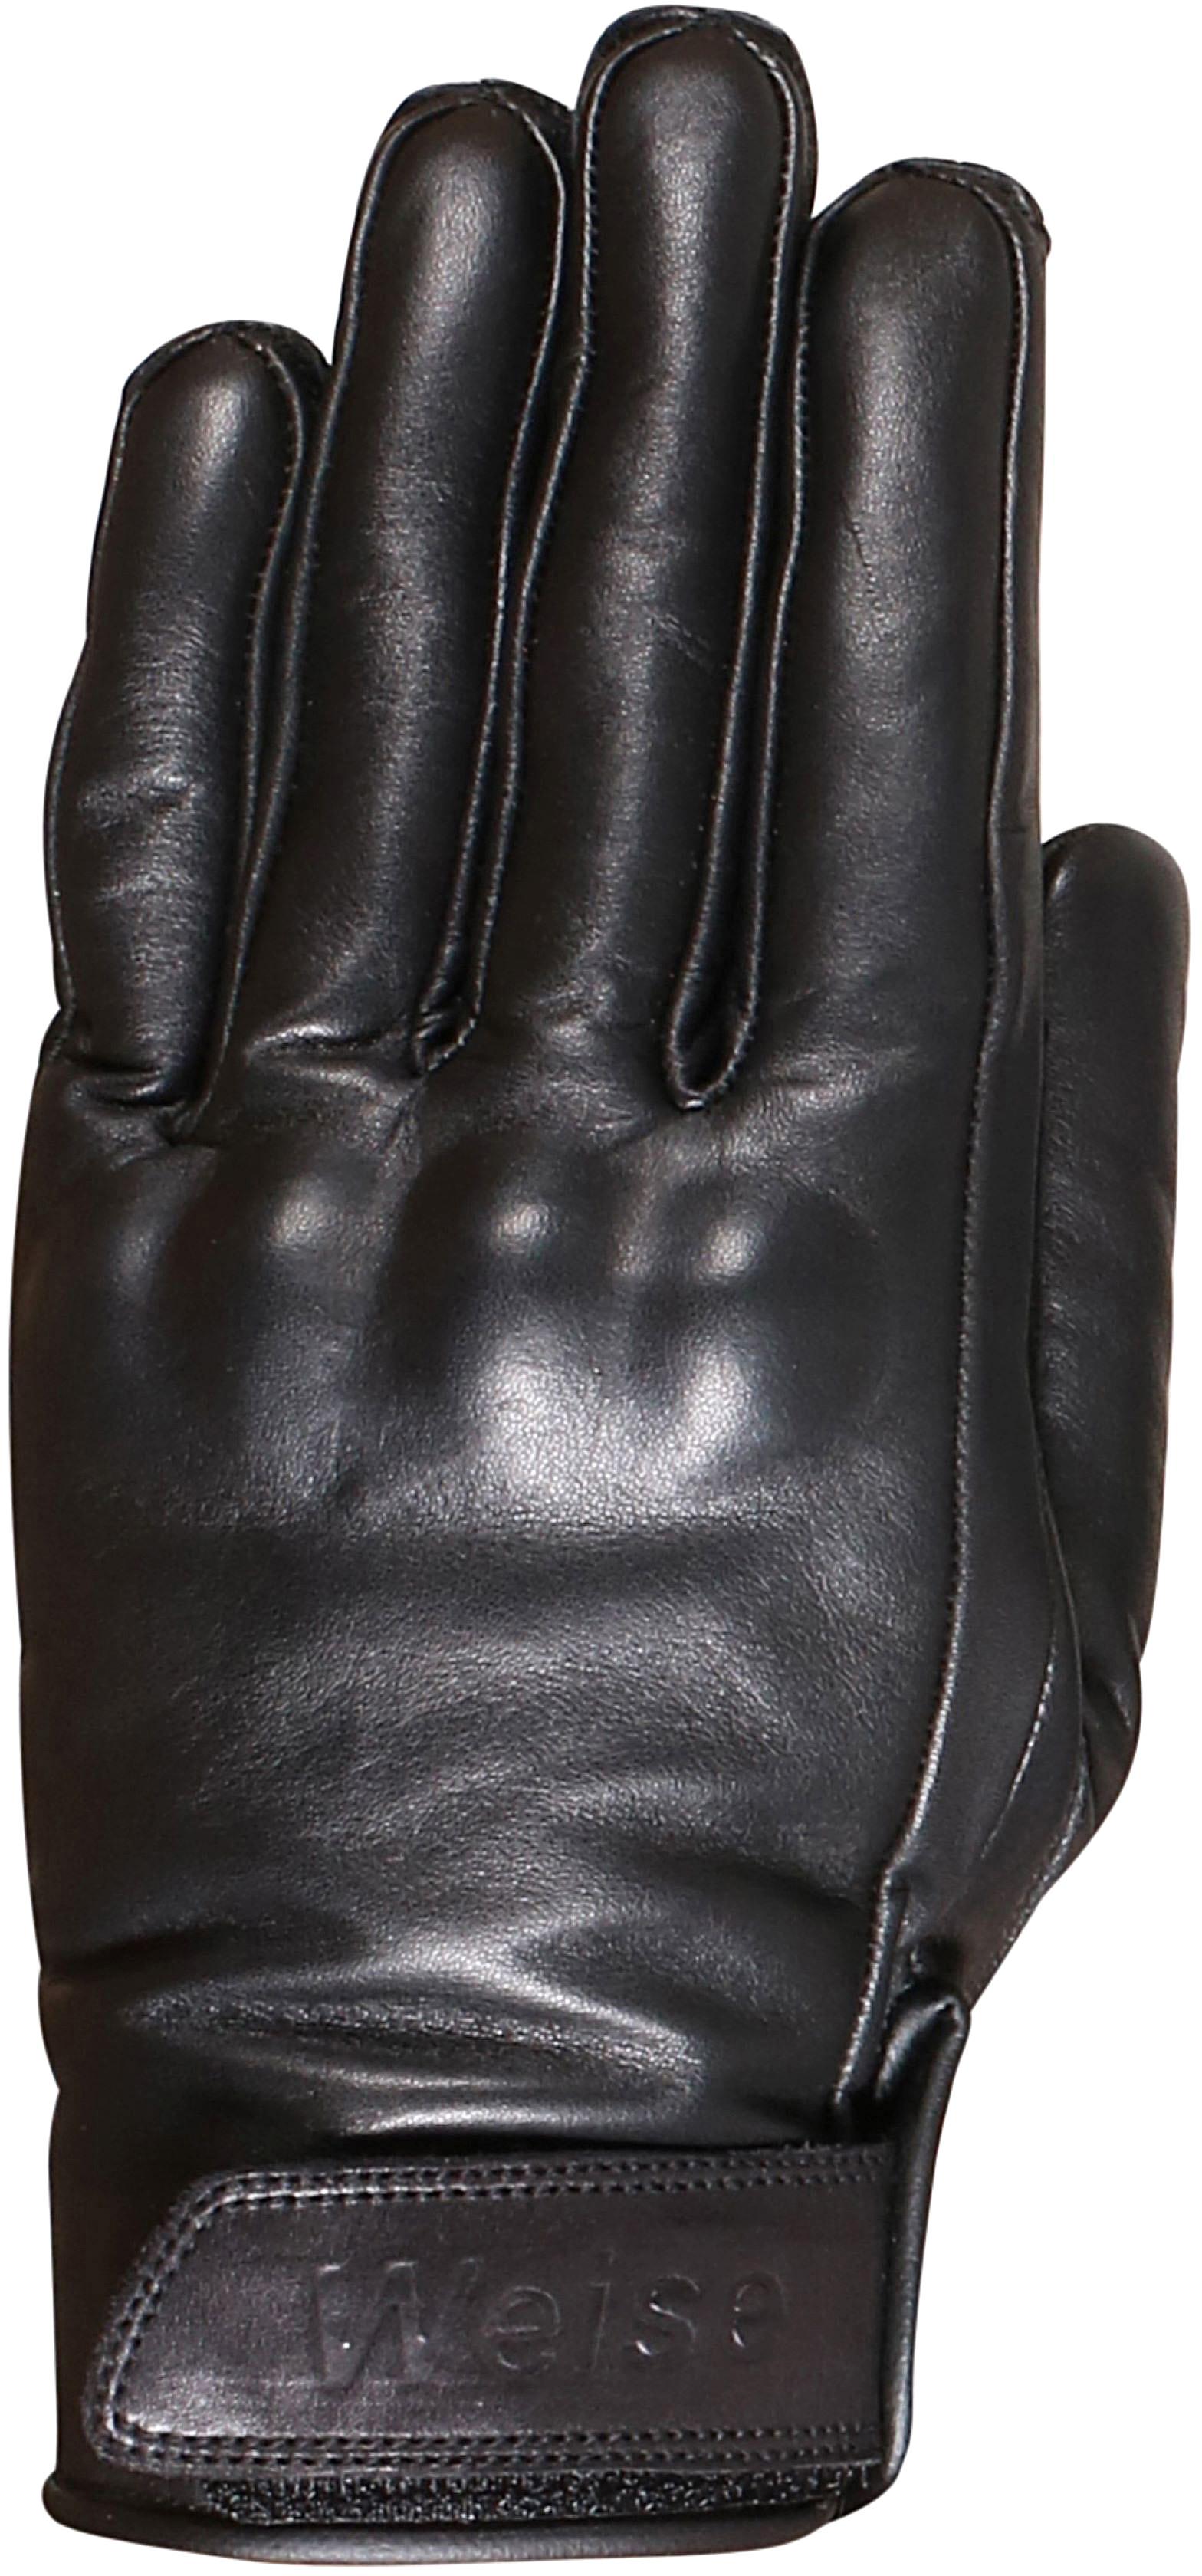 Weise Tilly Womens Motorcycle Gloves - Black, Xs